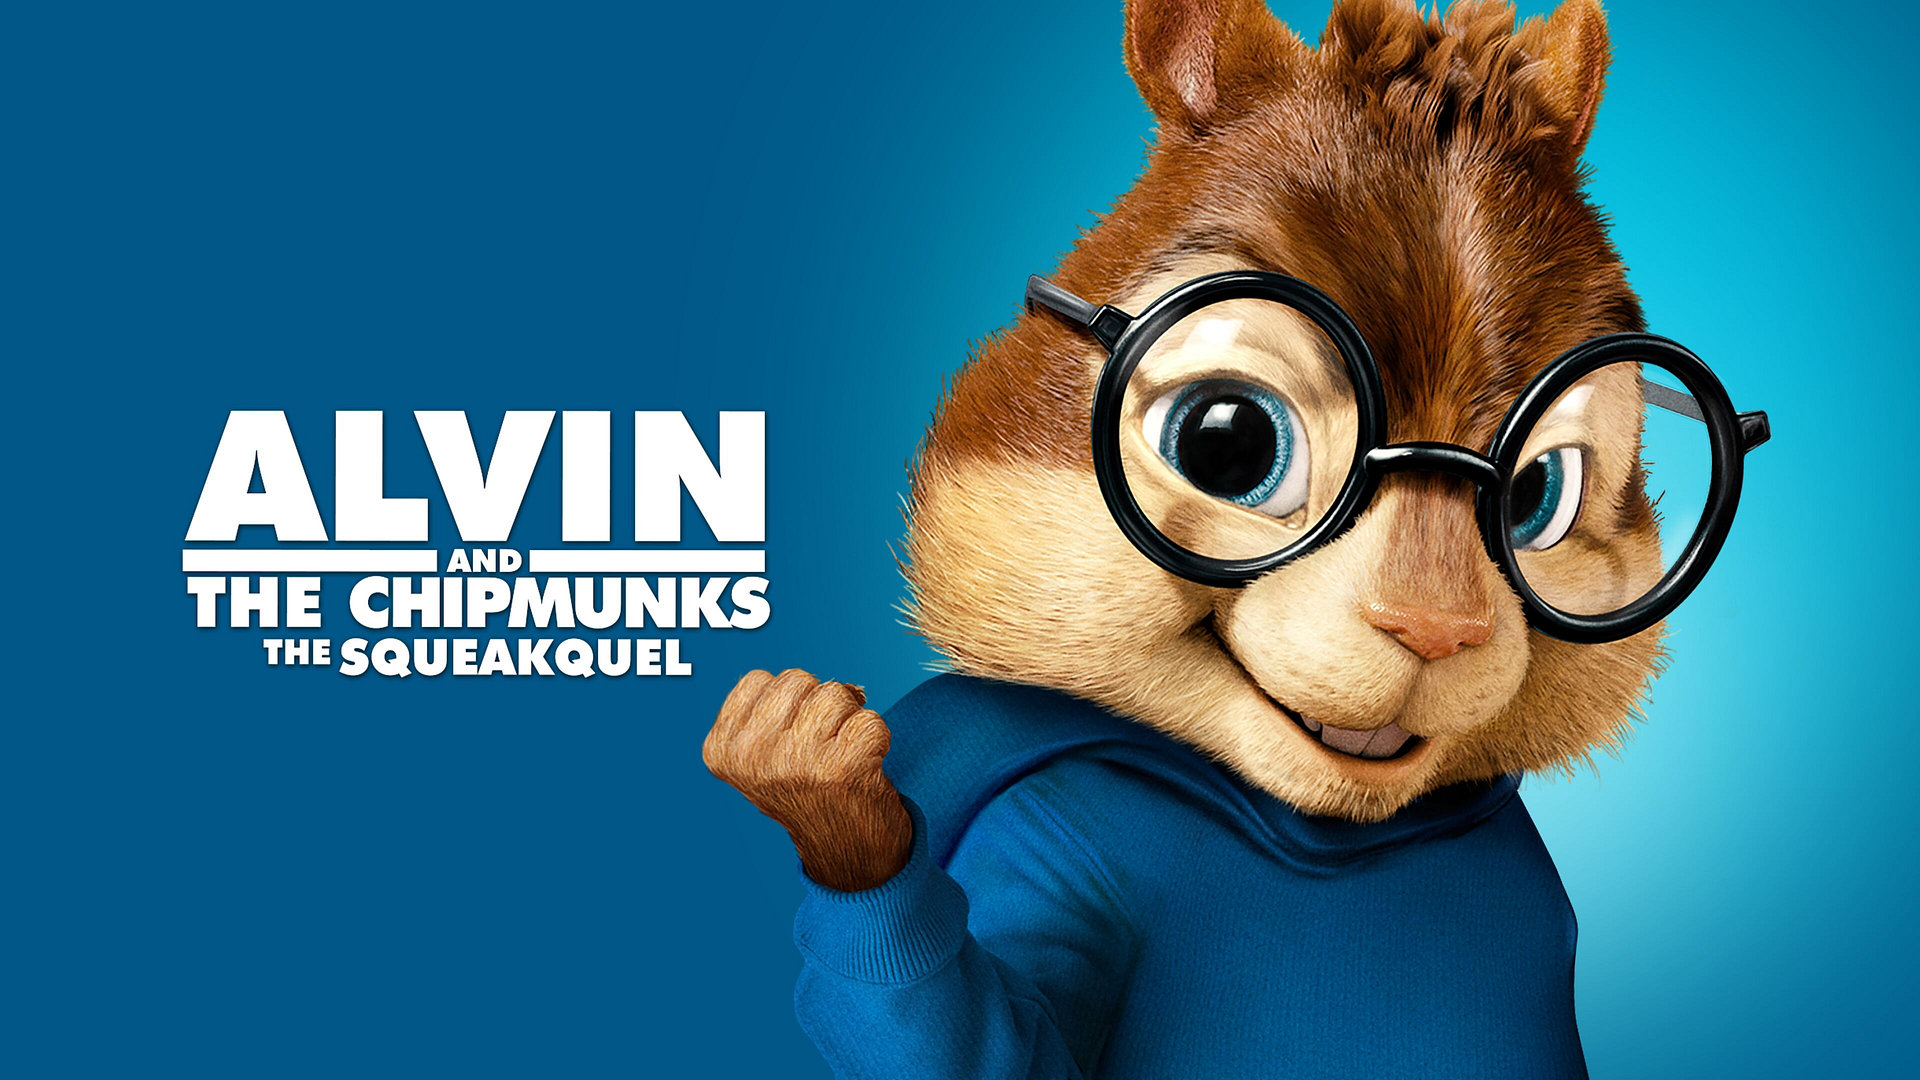 Alvin and the Chipmunks: The Squeakquel (Original tale)